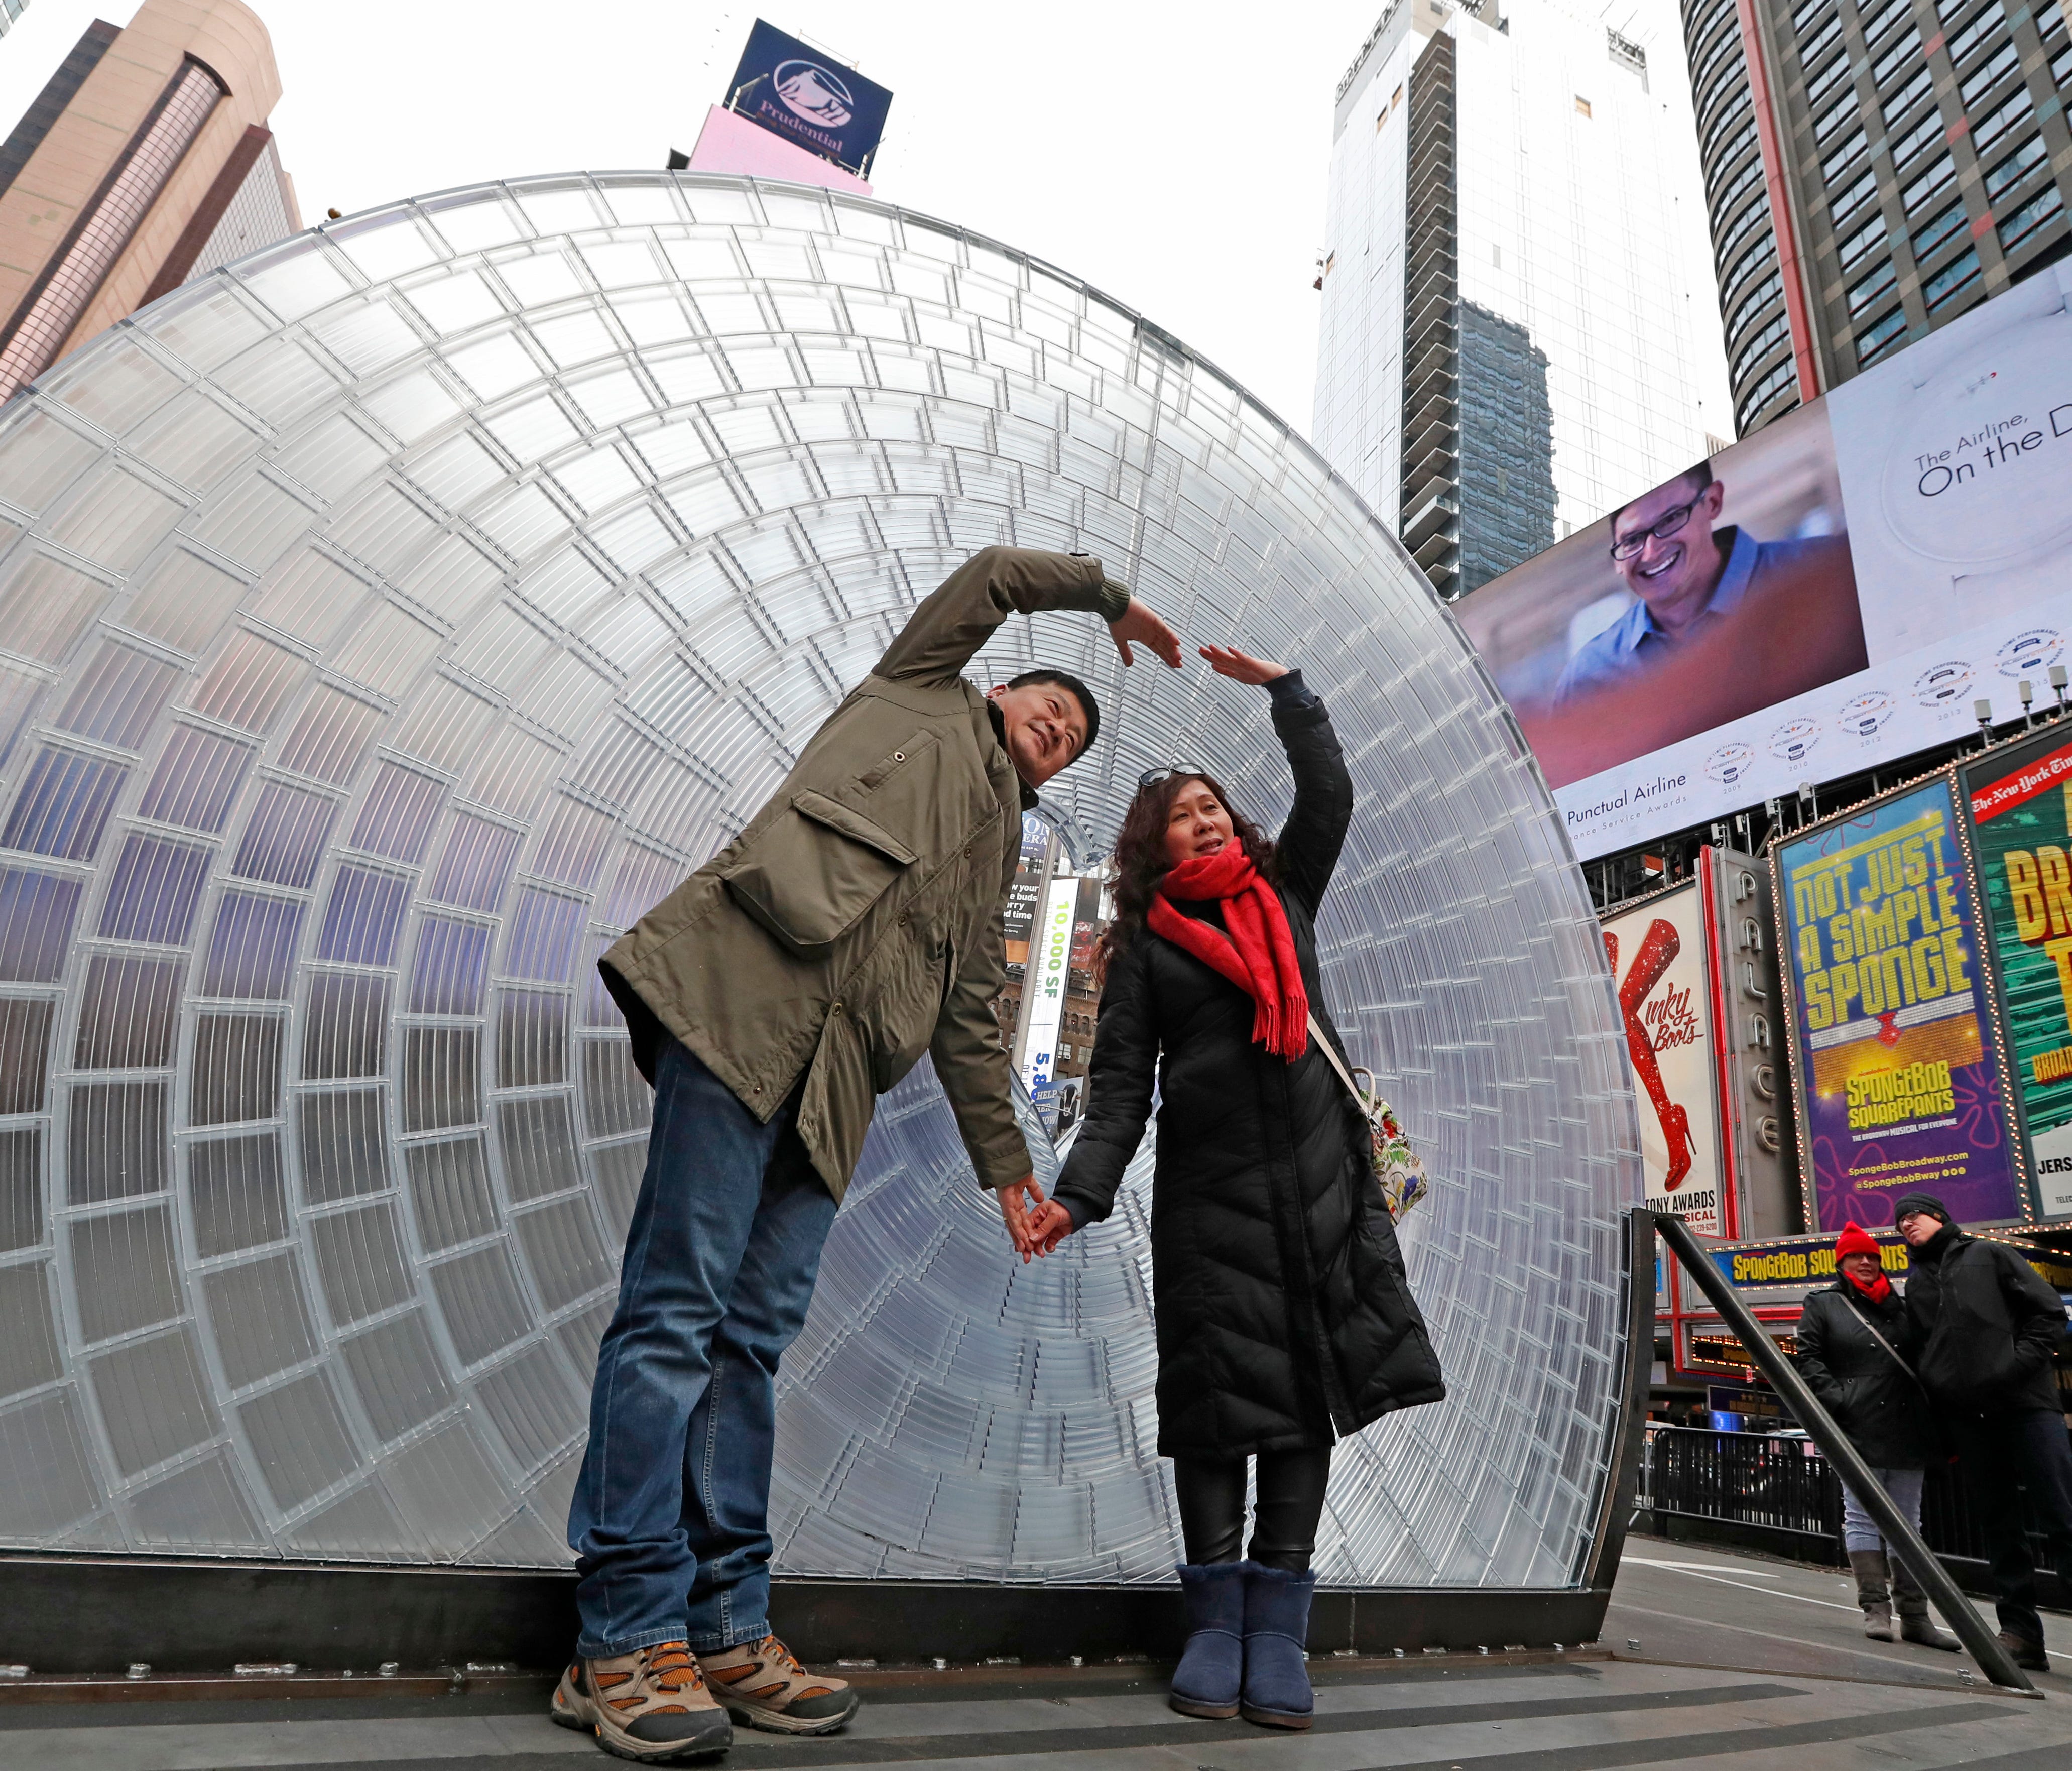 Chang Ming, left, and his wife Zhang Jin Hong, both of Tianjin, China, pose for a cell phone photo in front of 